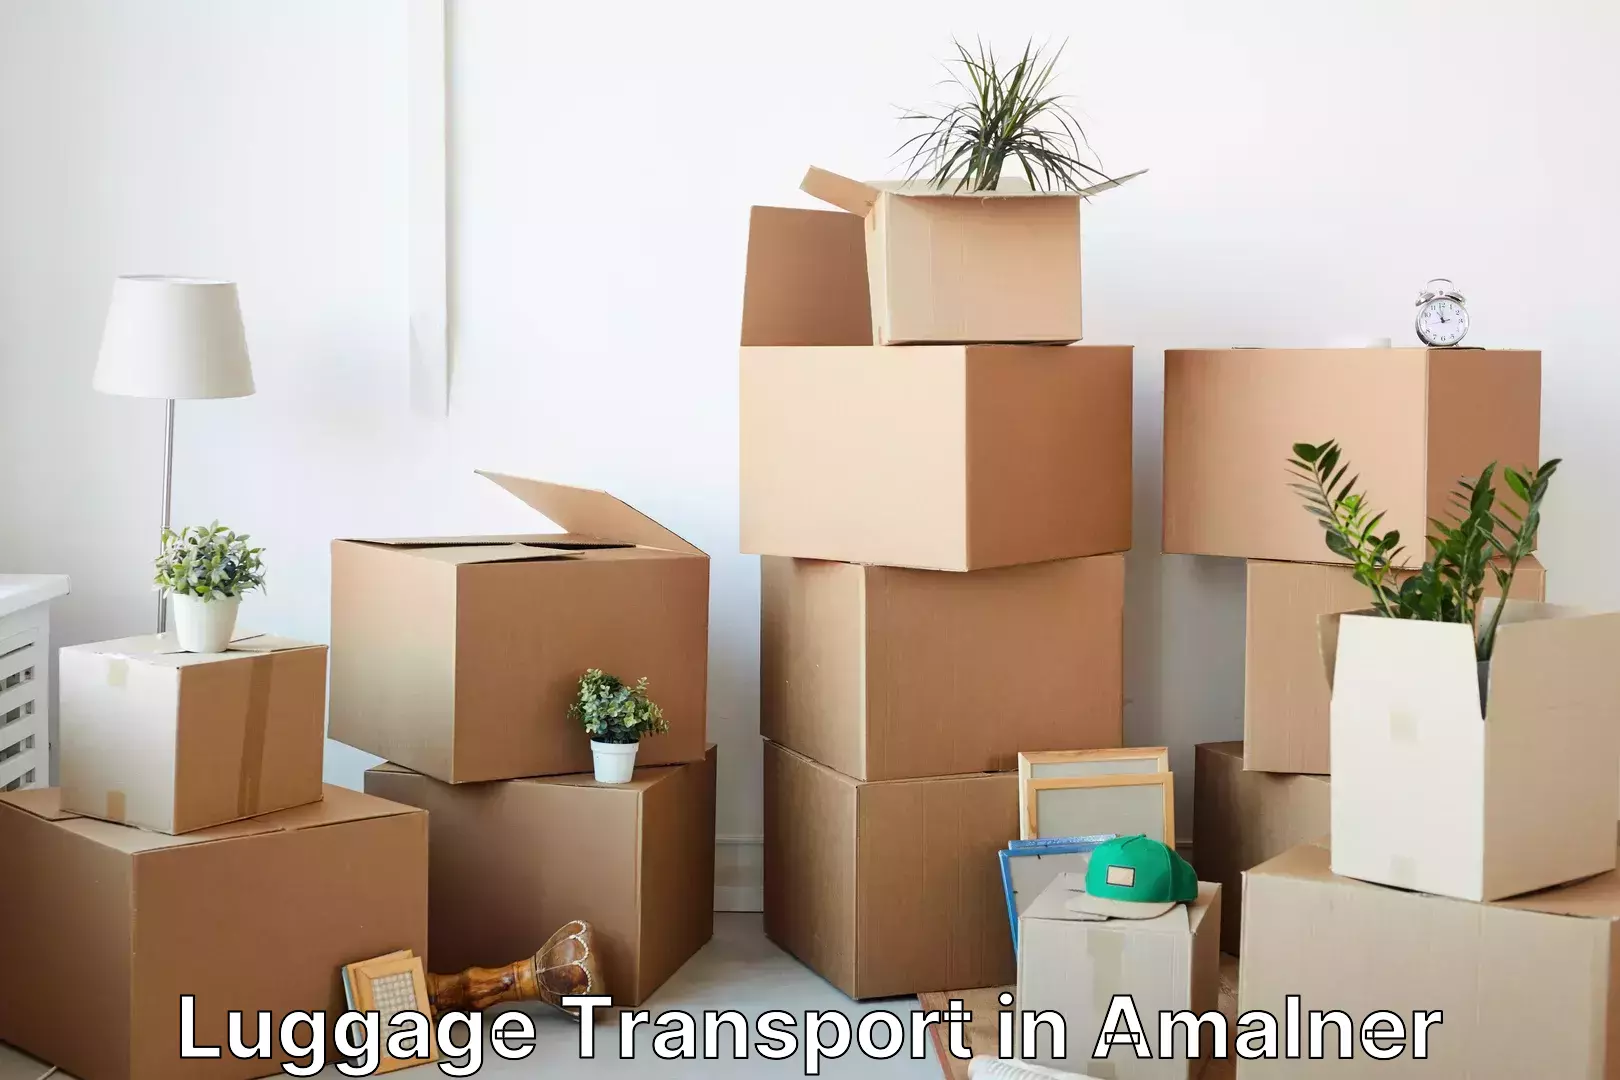 Doorstep luggage collection in Amalner